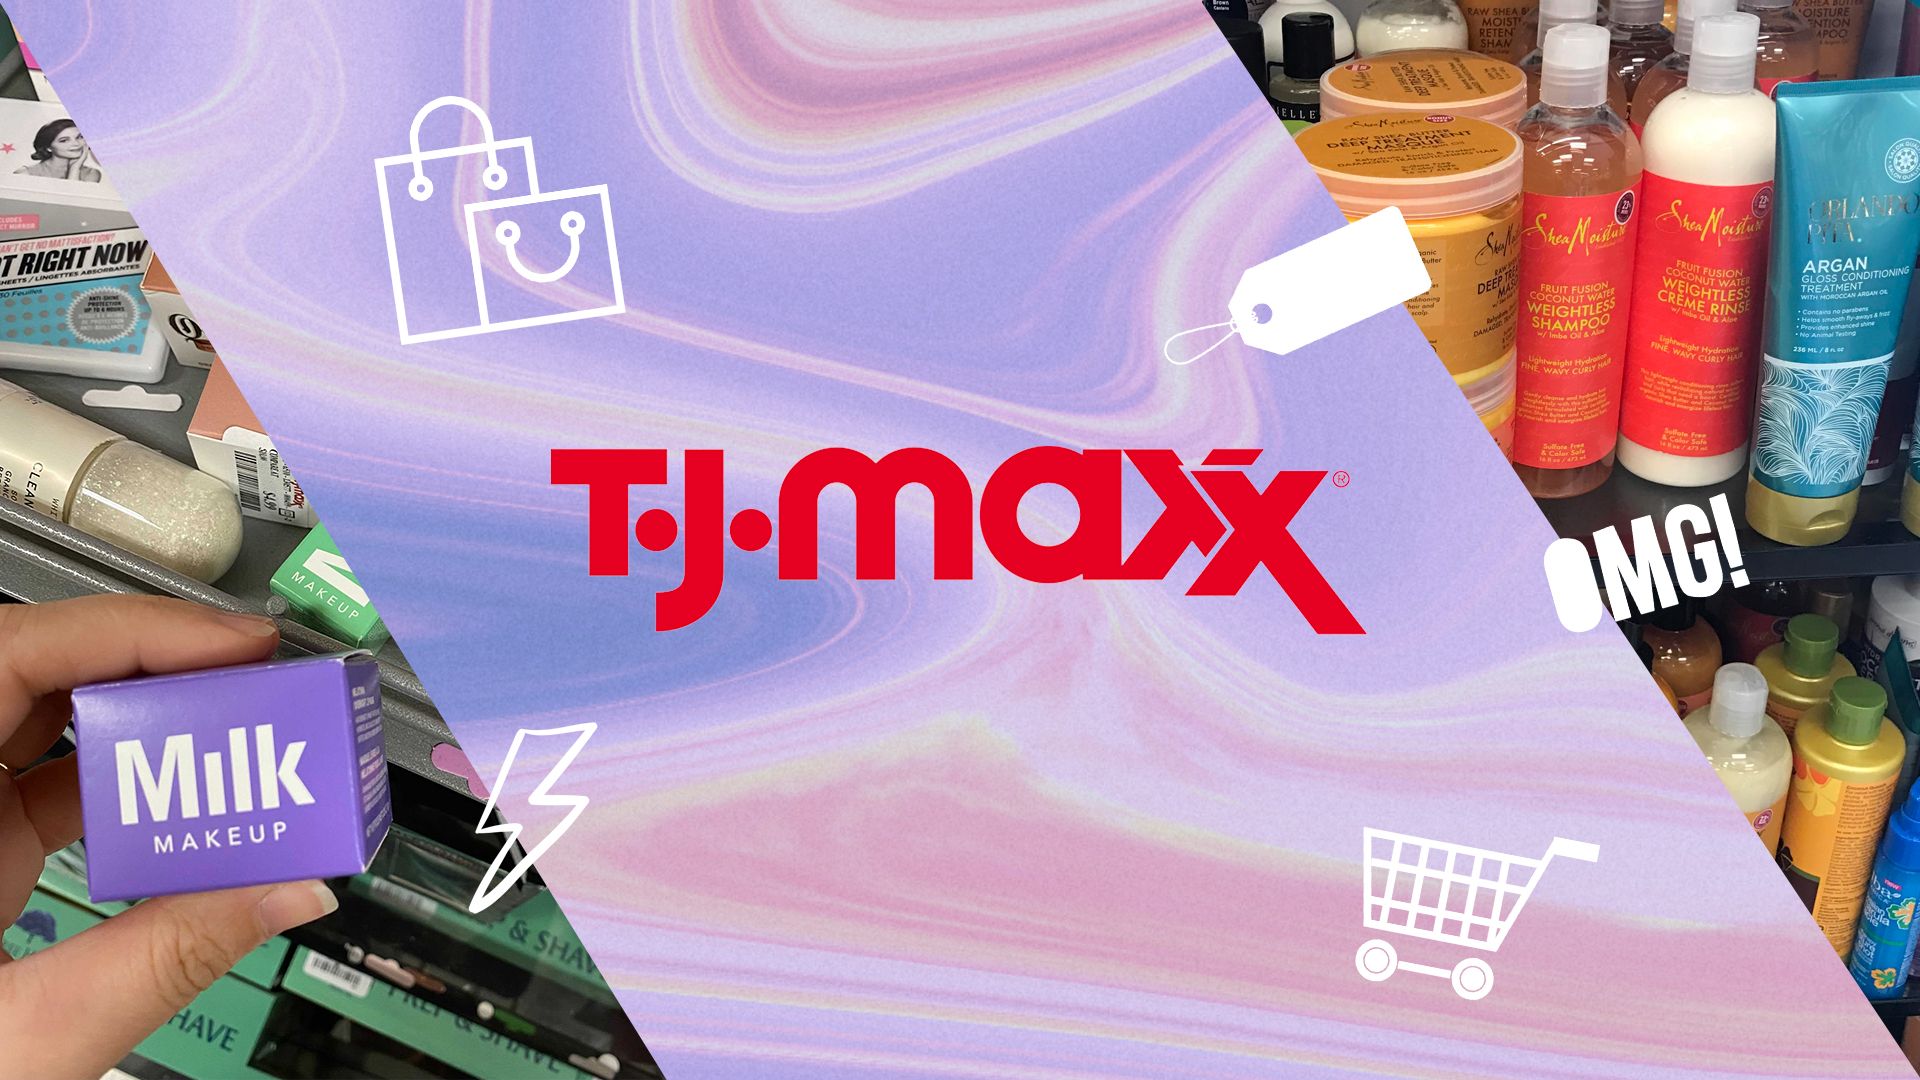 When do TJ Maxx and Marshall's get shipments of new clothes?